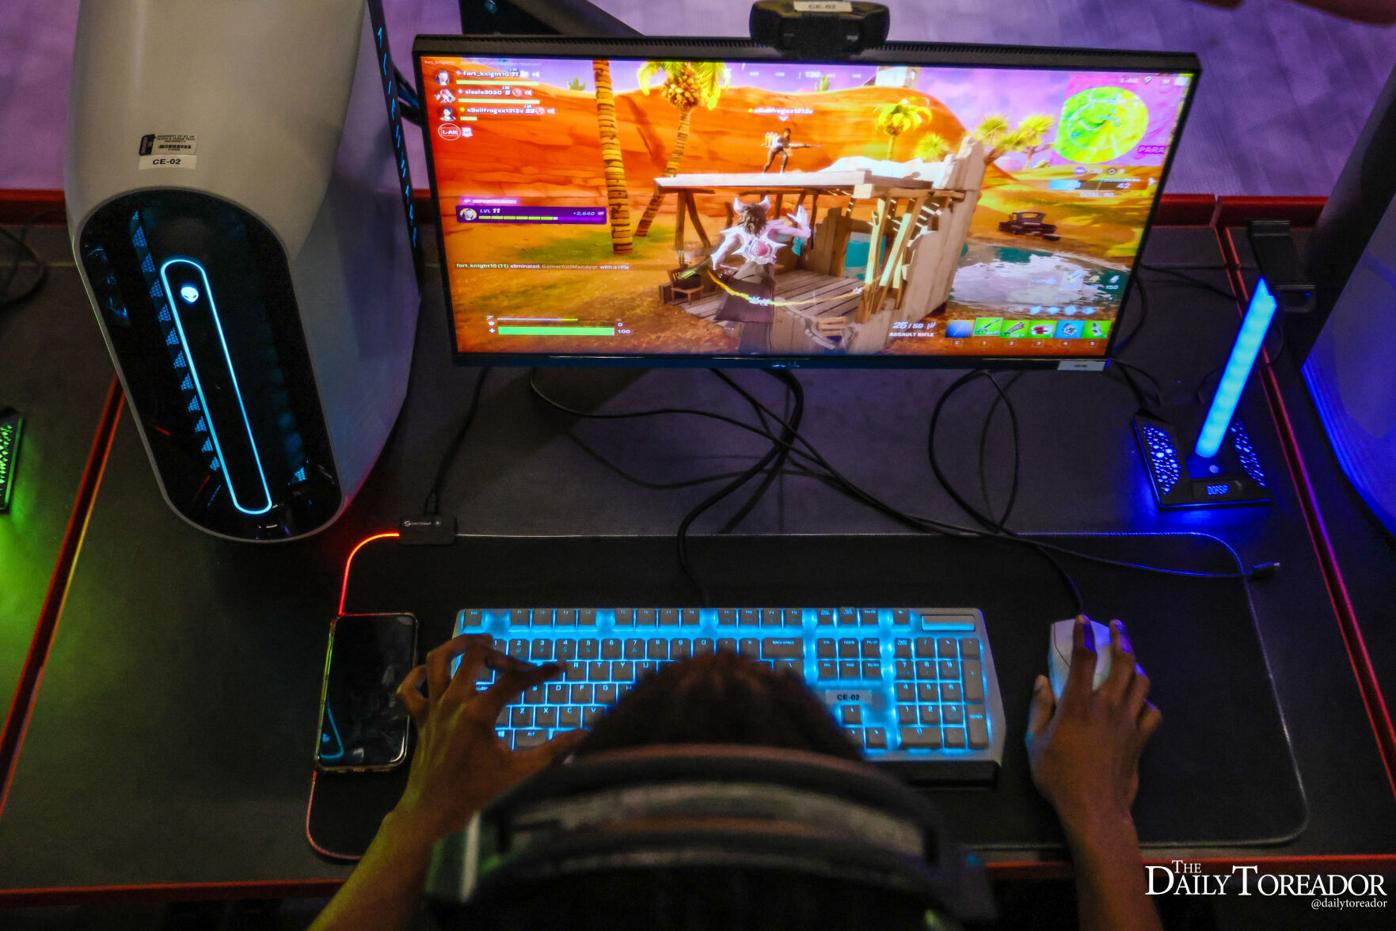 Esports Lab provides competitive, casual gaming opportunities